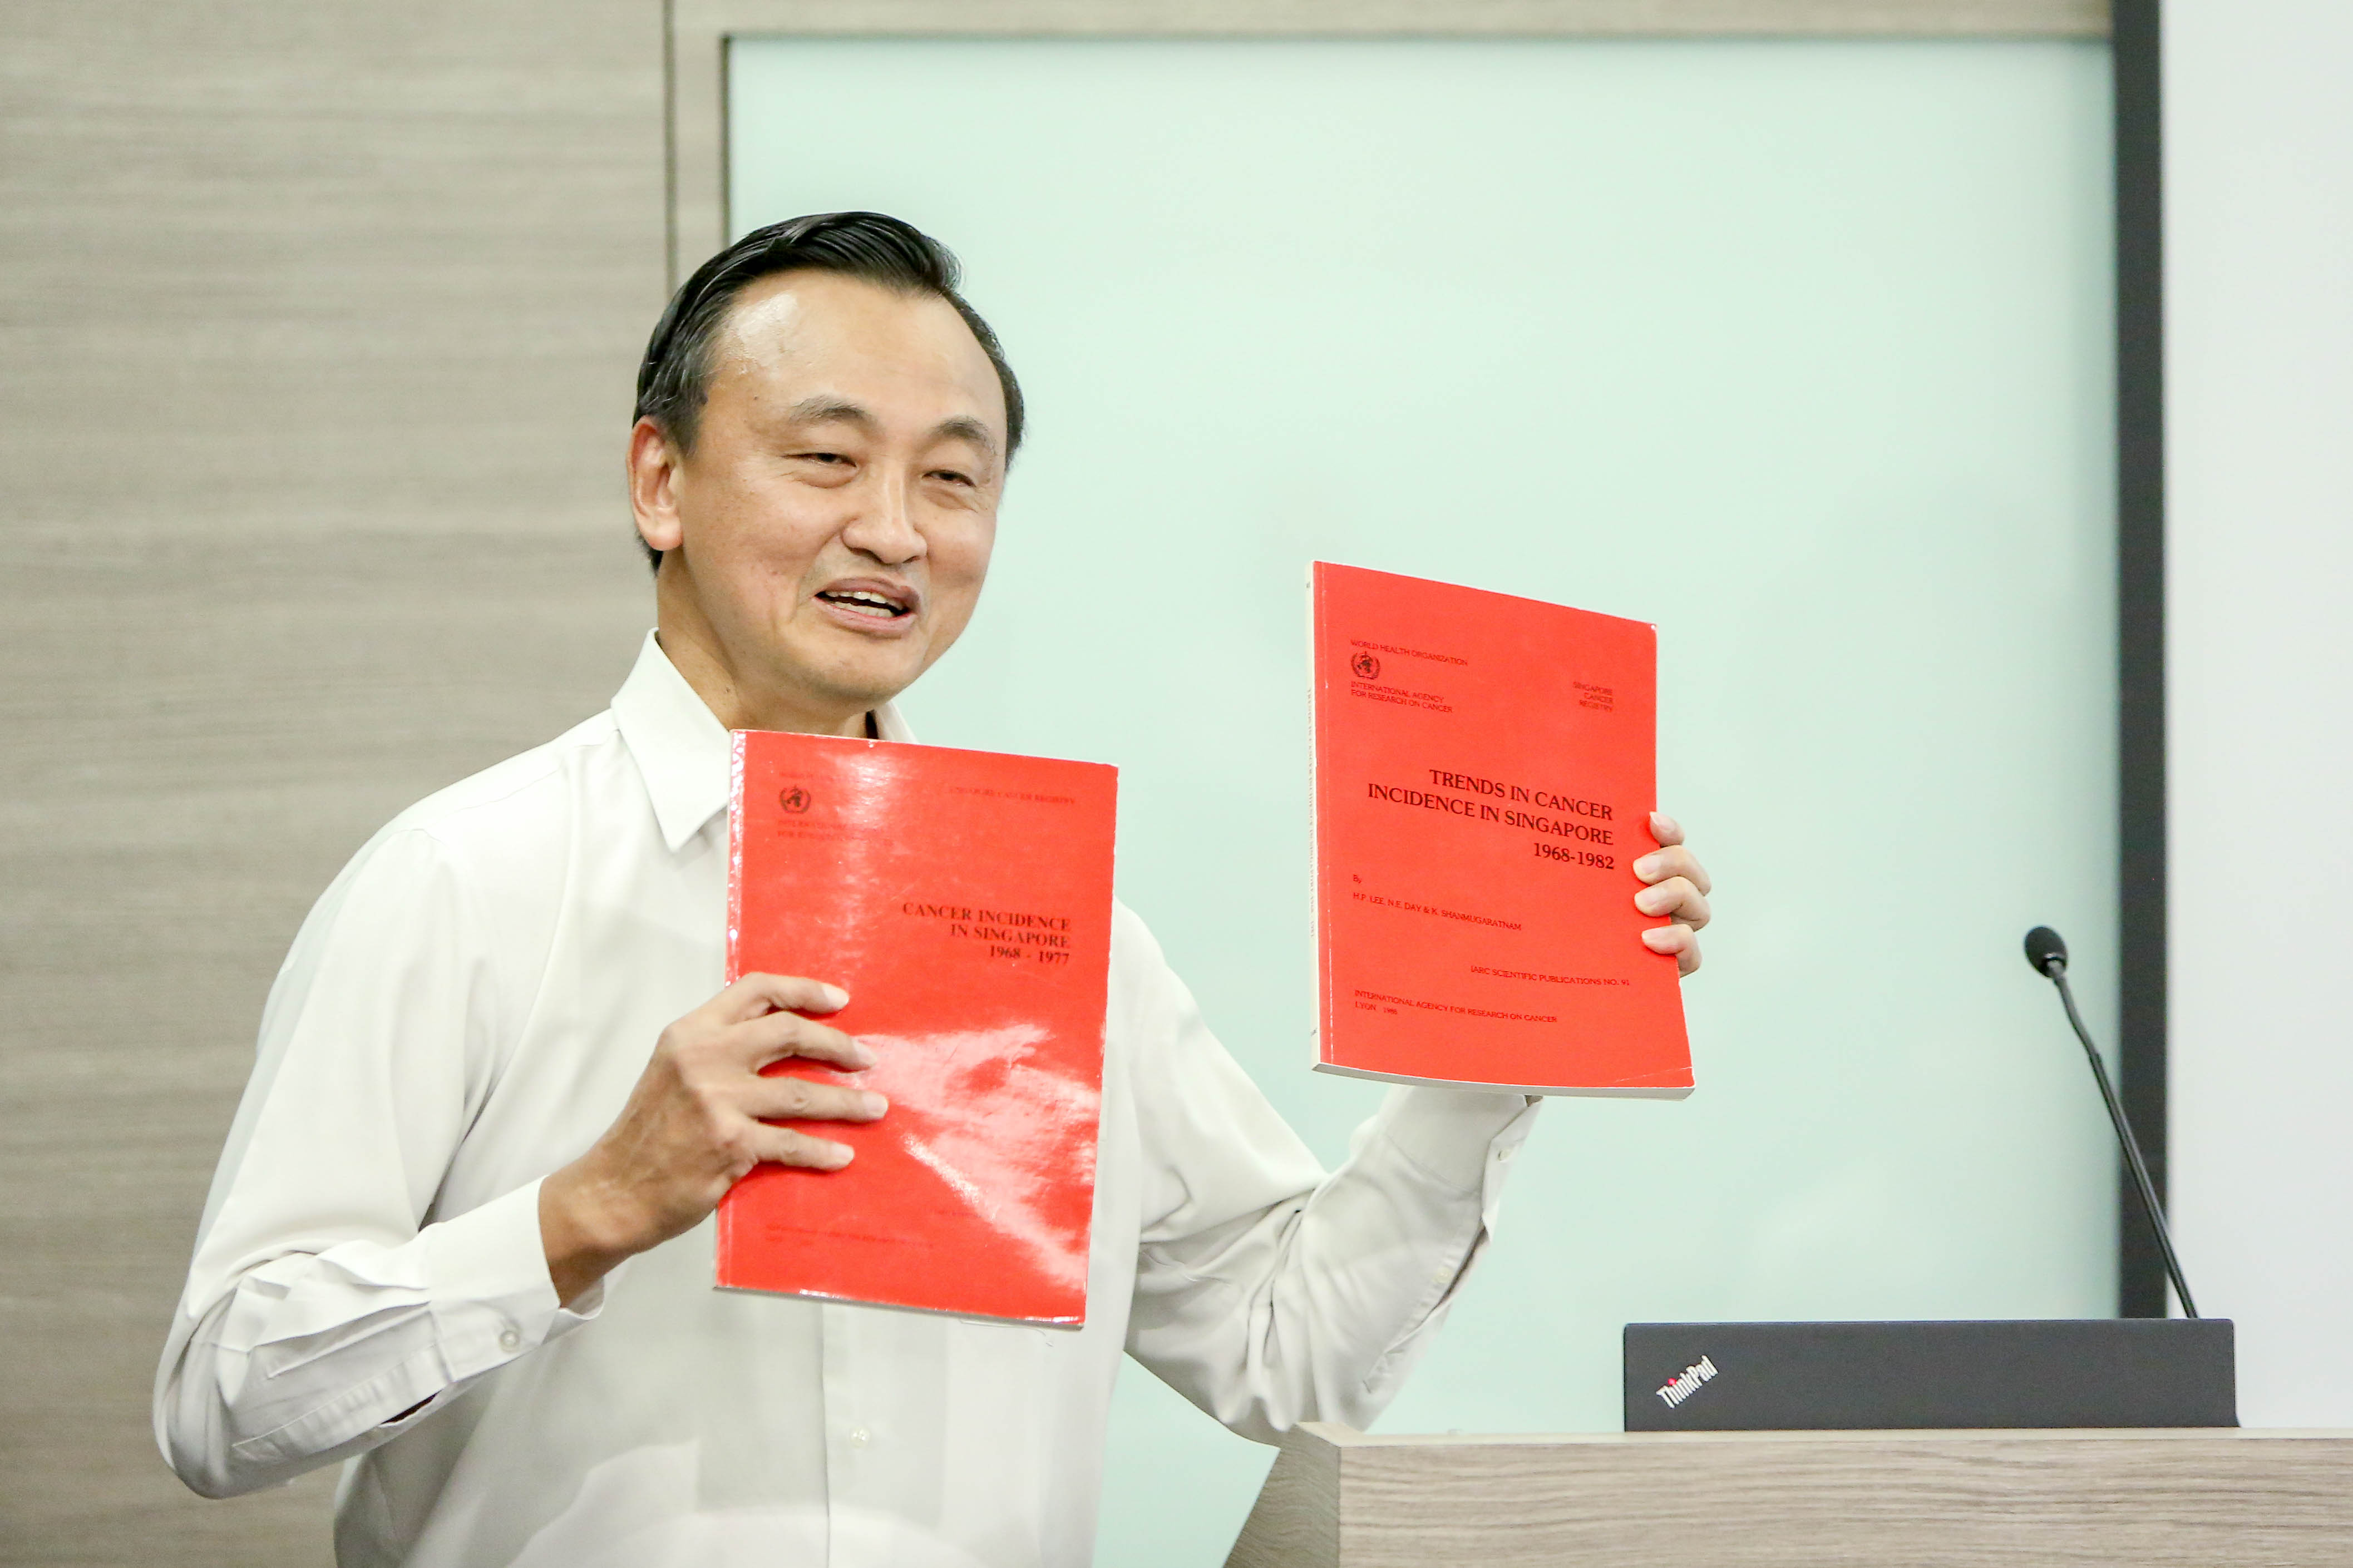 Prof Chia holding the first two monographs by the Singapore Cancer Registry.